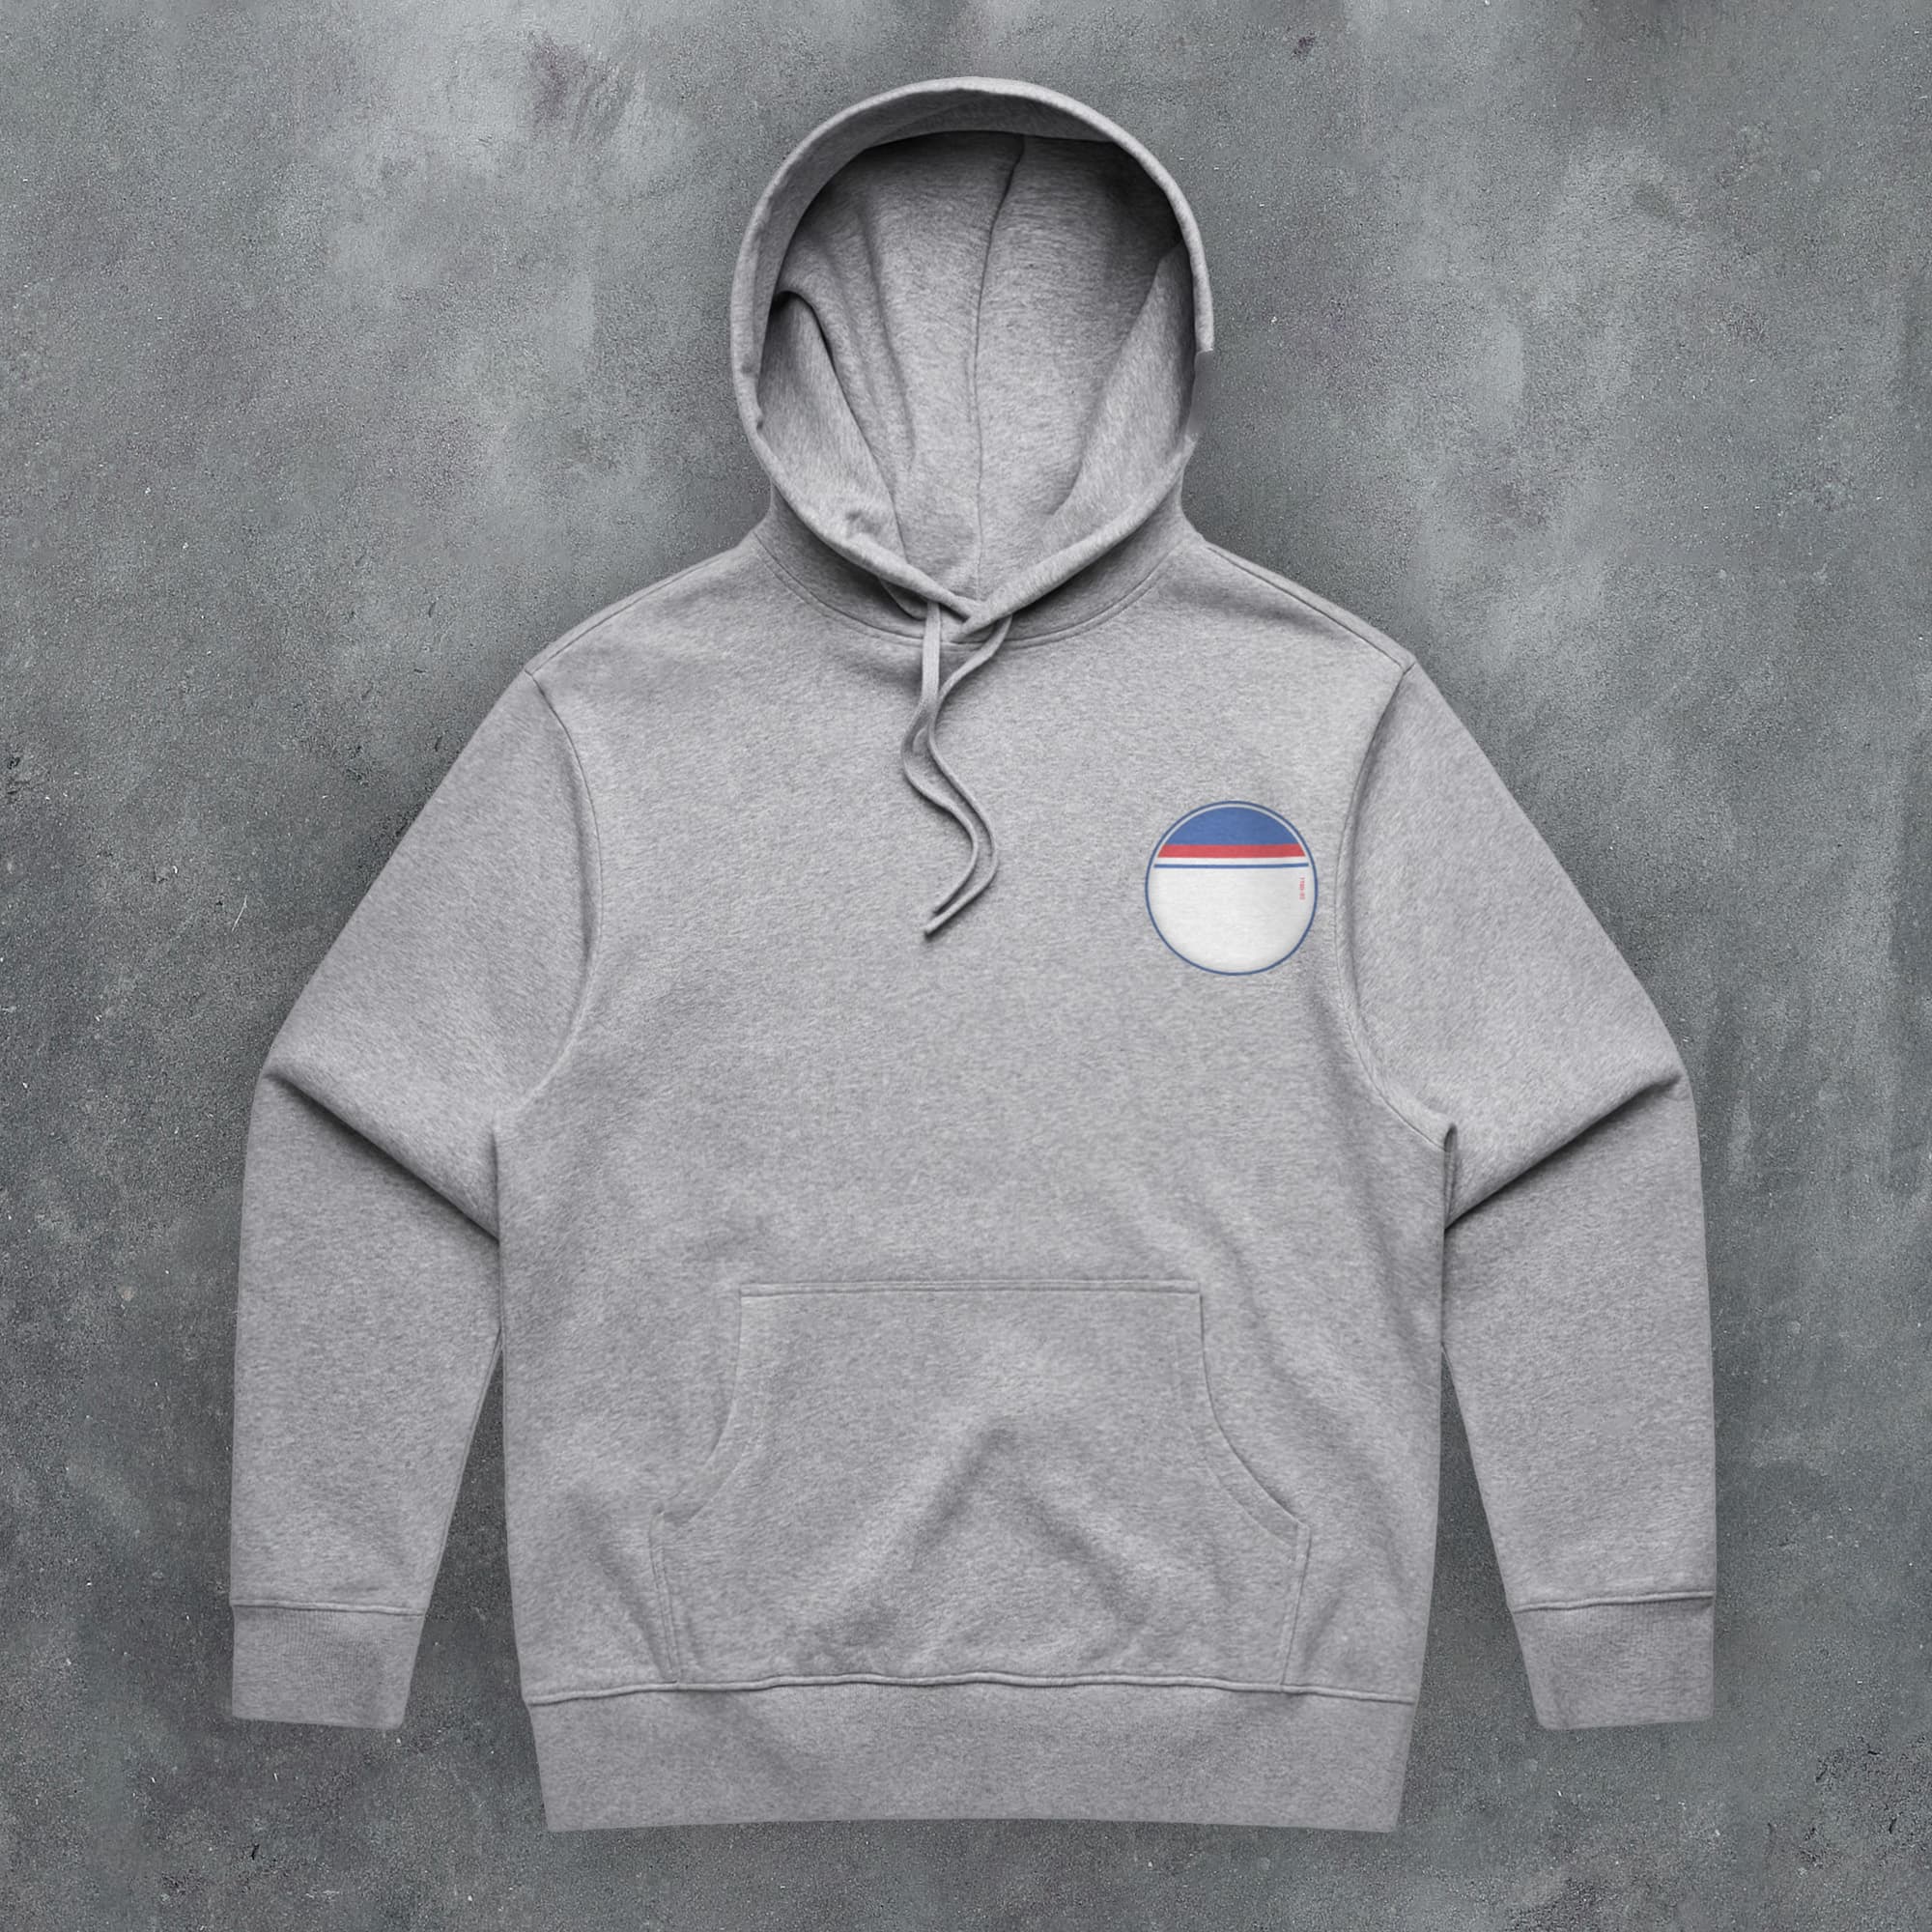 a grey hoodie with a rainbow patch on it